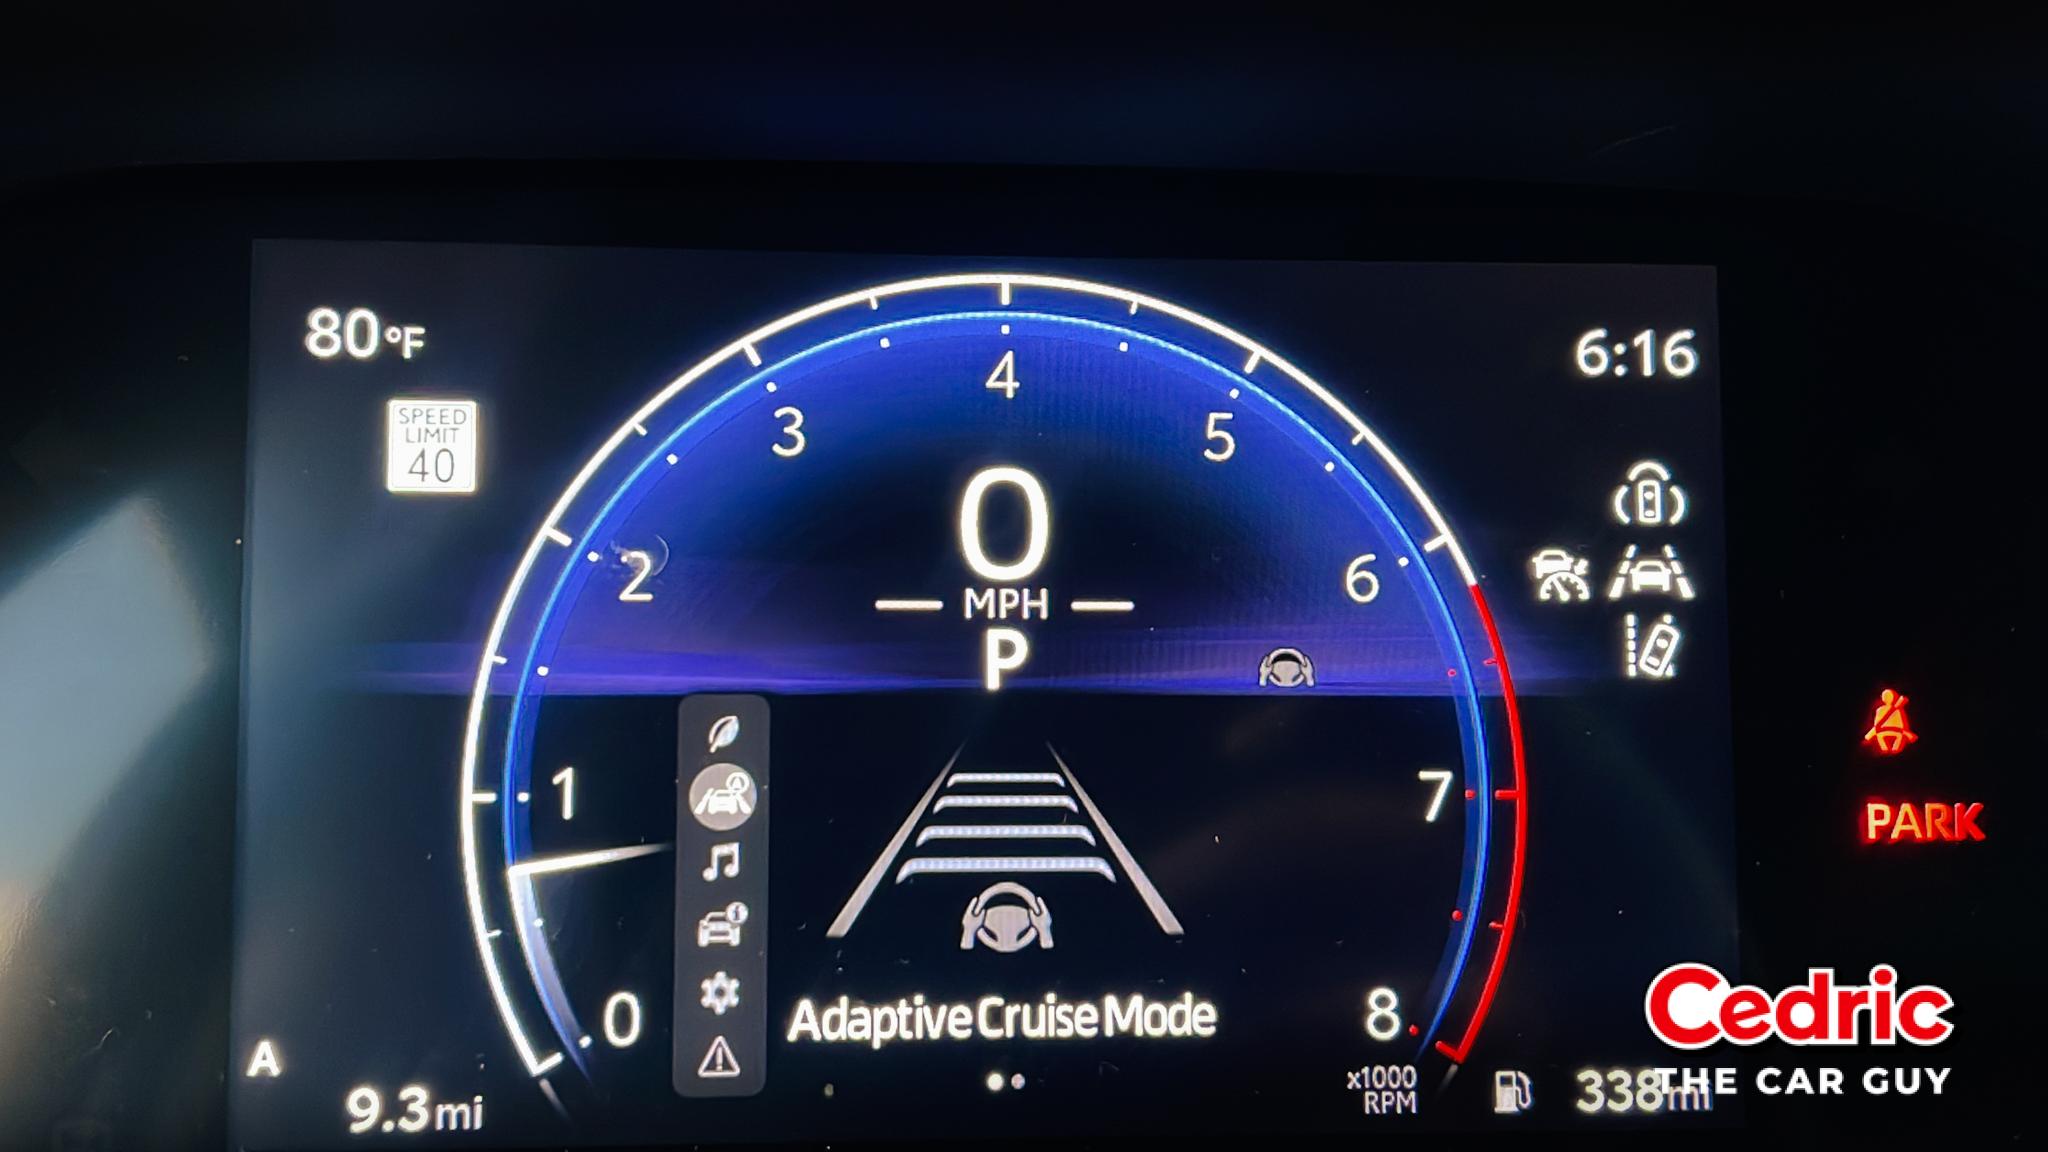 The Dynamic Radar Cruise Control within the 7-inch MID menu toggles from Cruise Control to Adaptive Cruise Control